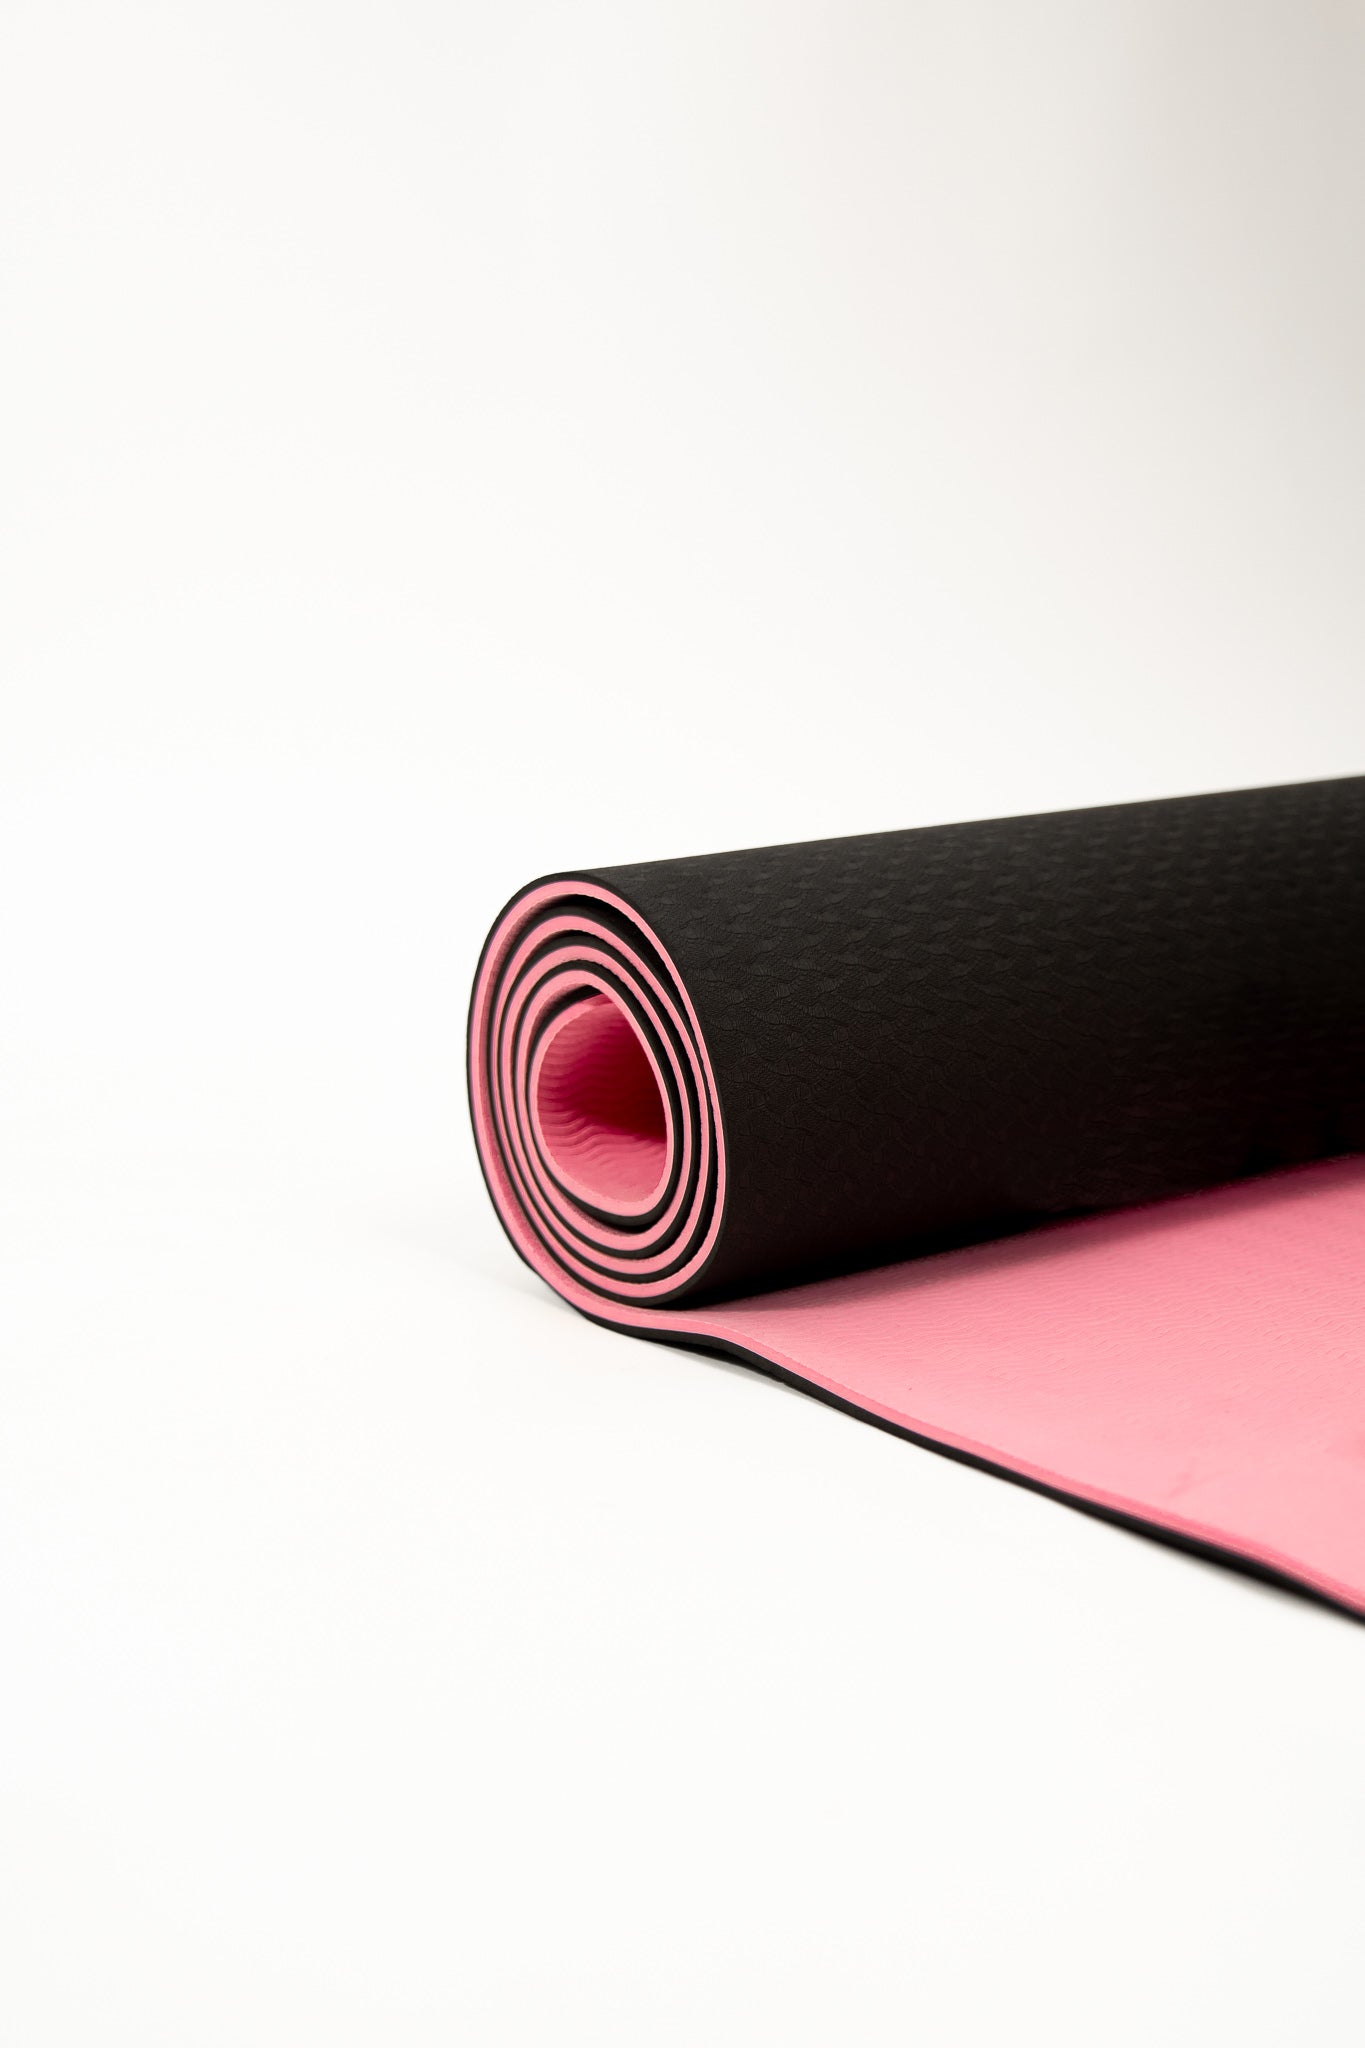 The 7 Best Yoga Mats for Finding Your Flow - Buy Side from WSJ